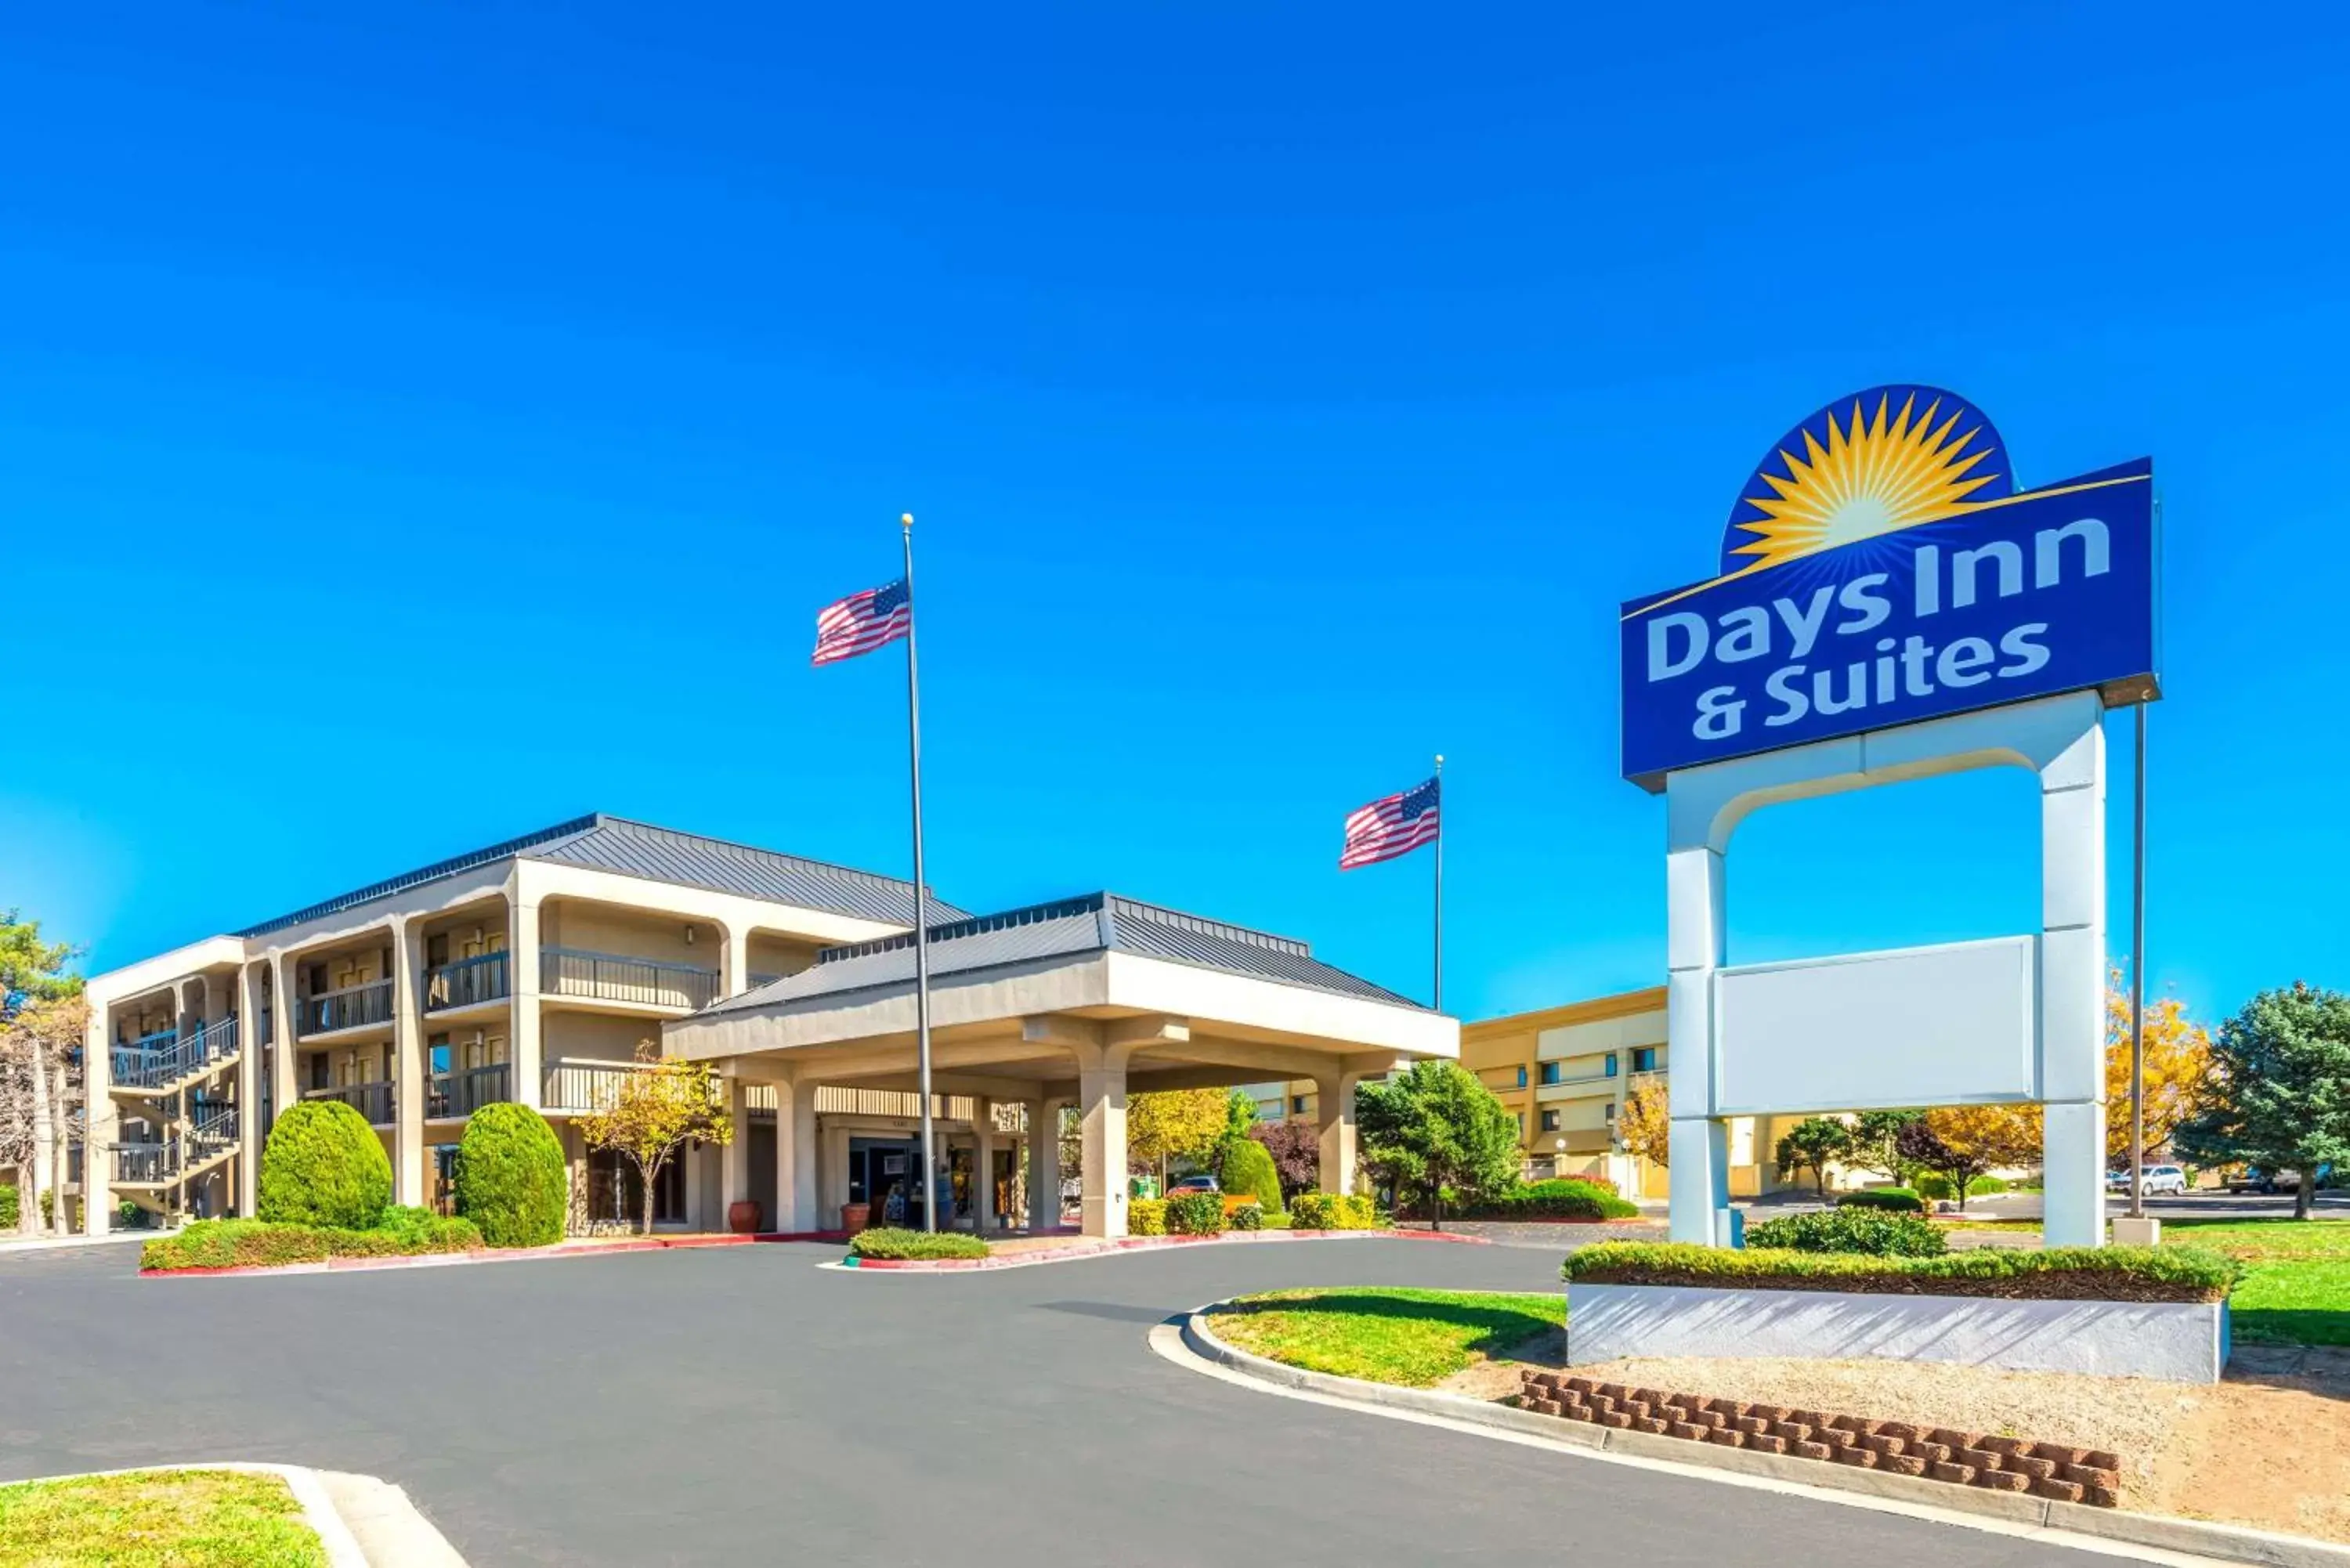 Property building in Days Inn & Suites by Wyndham Albuquerque North